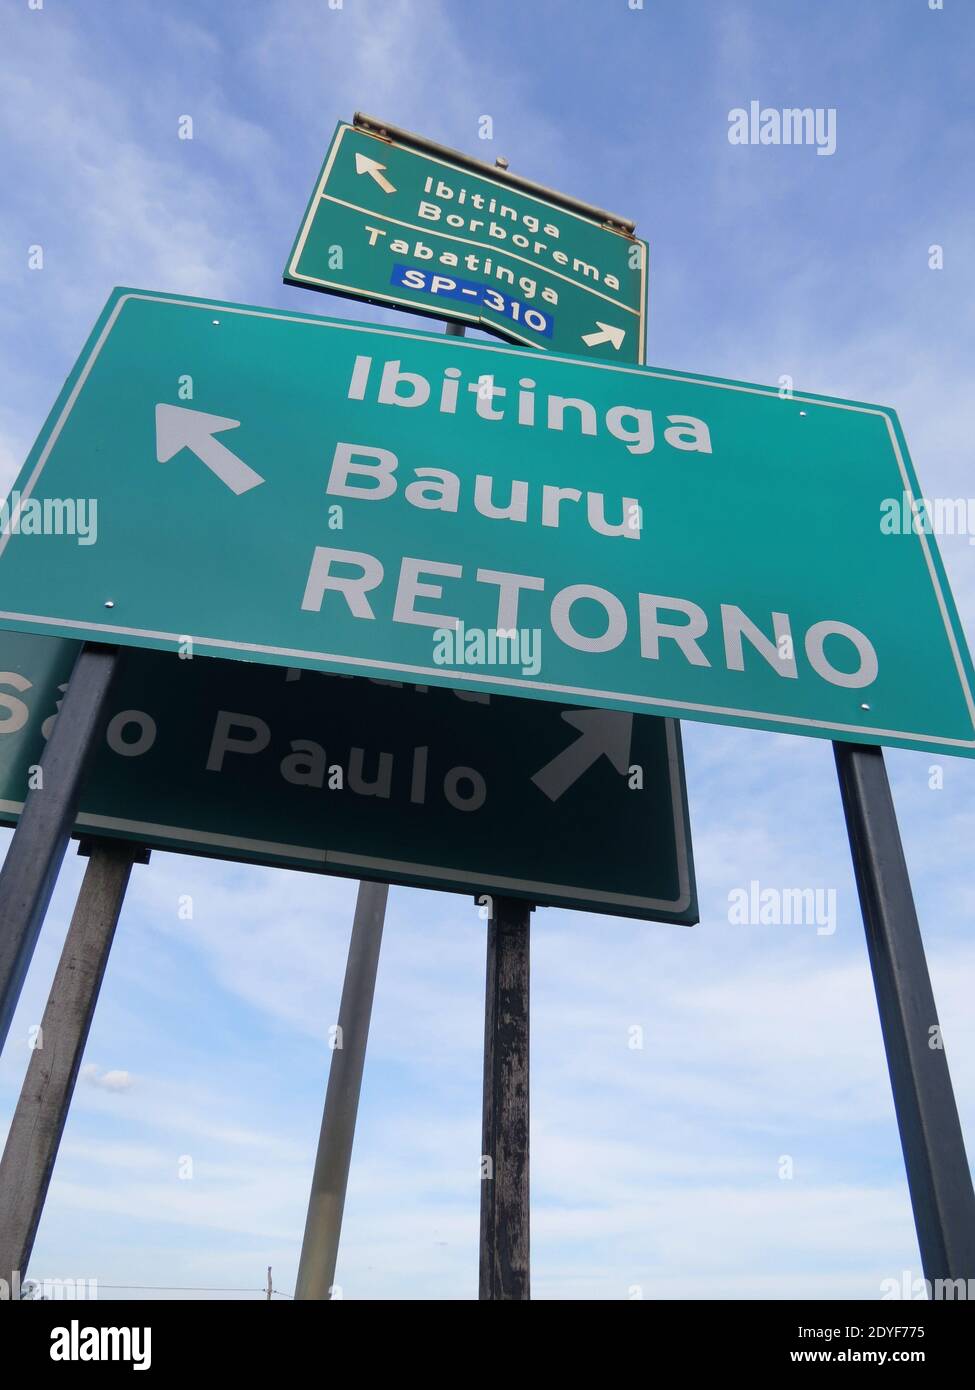 Group of metal signs indicating multiple locations in a confuse way at brazilian countryside Stock Photo